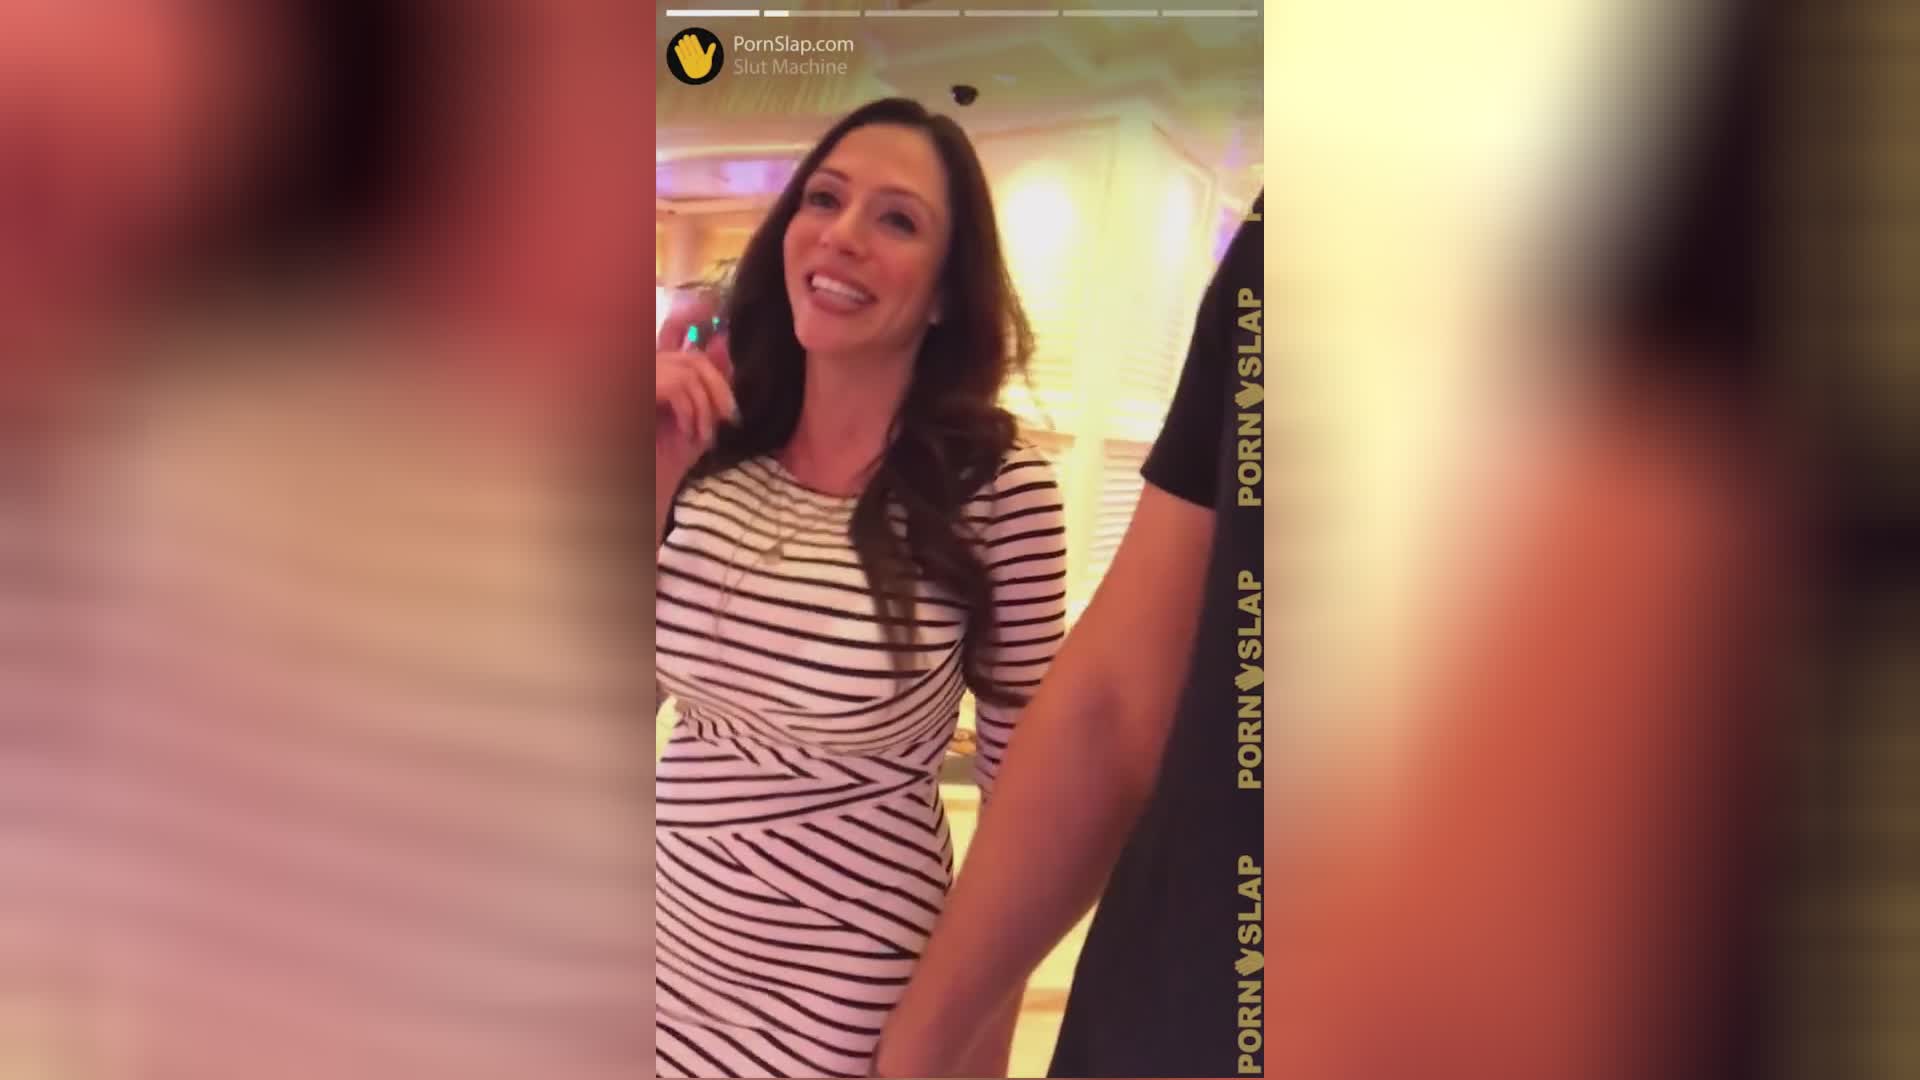 Picking up from the Casino - Videos image